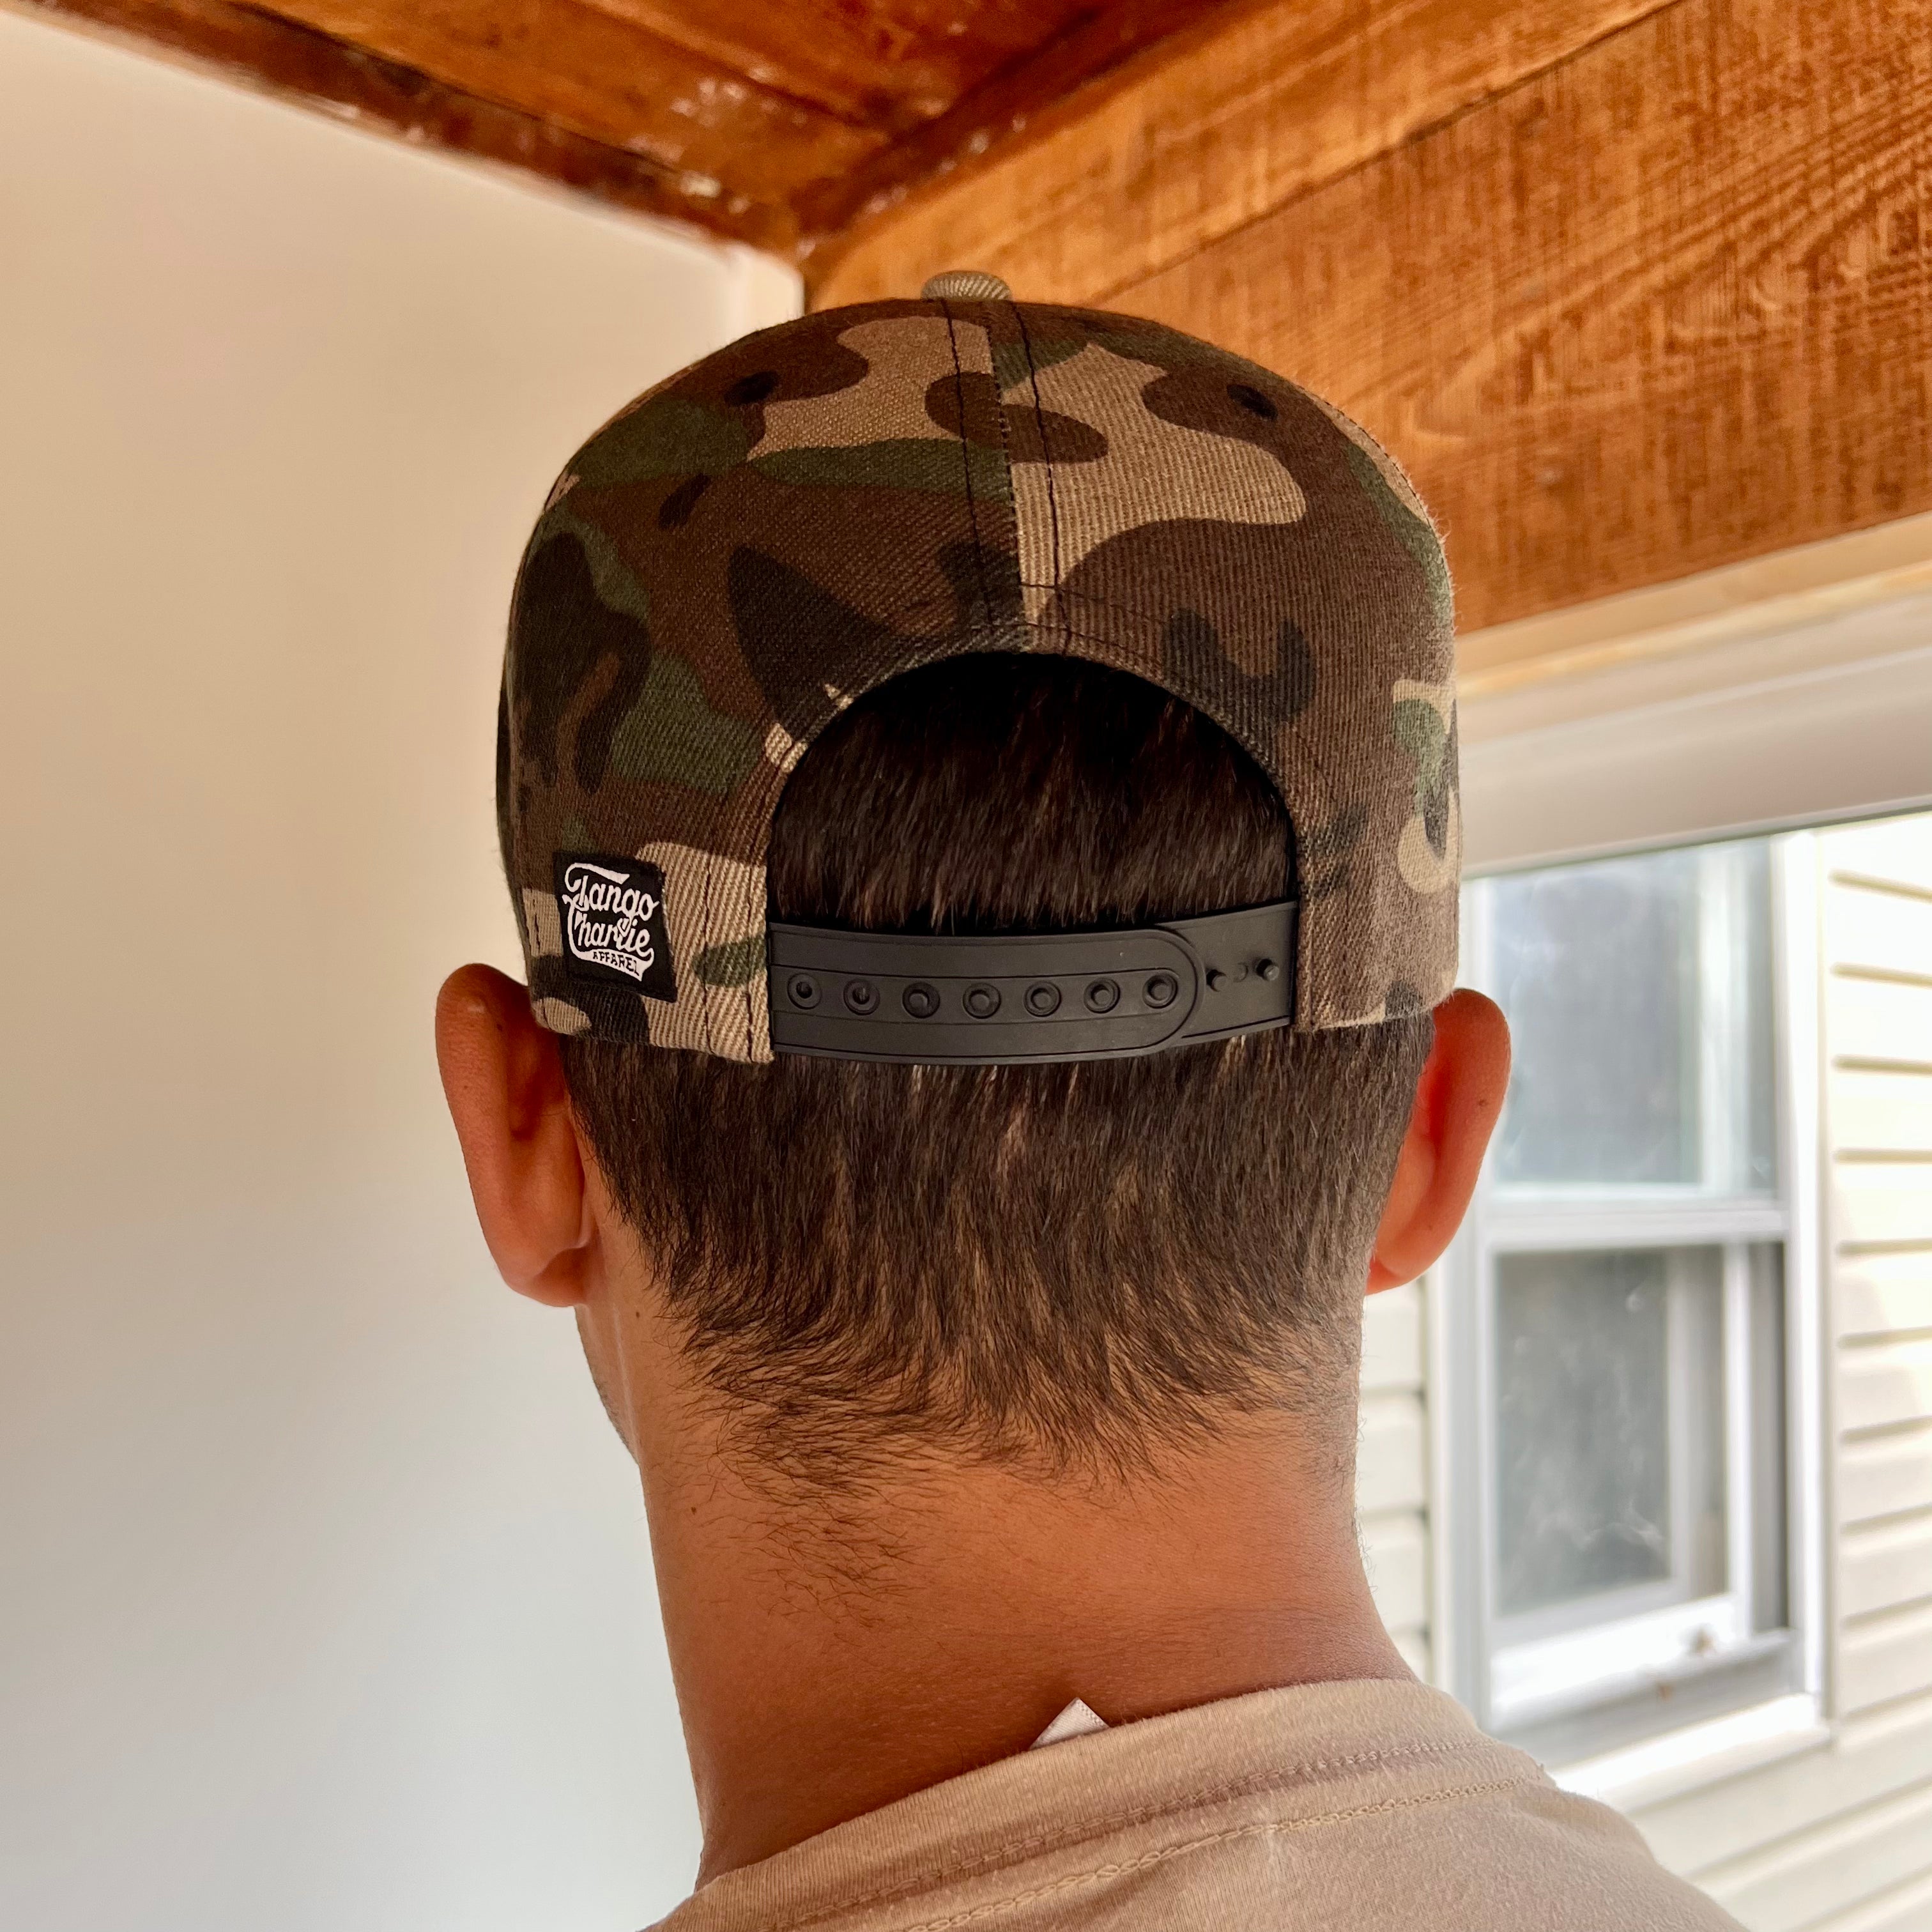 Darkness Is A Hell of A Coach - Snapback Hat Camo Flat Brim